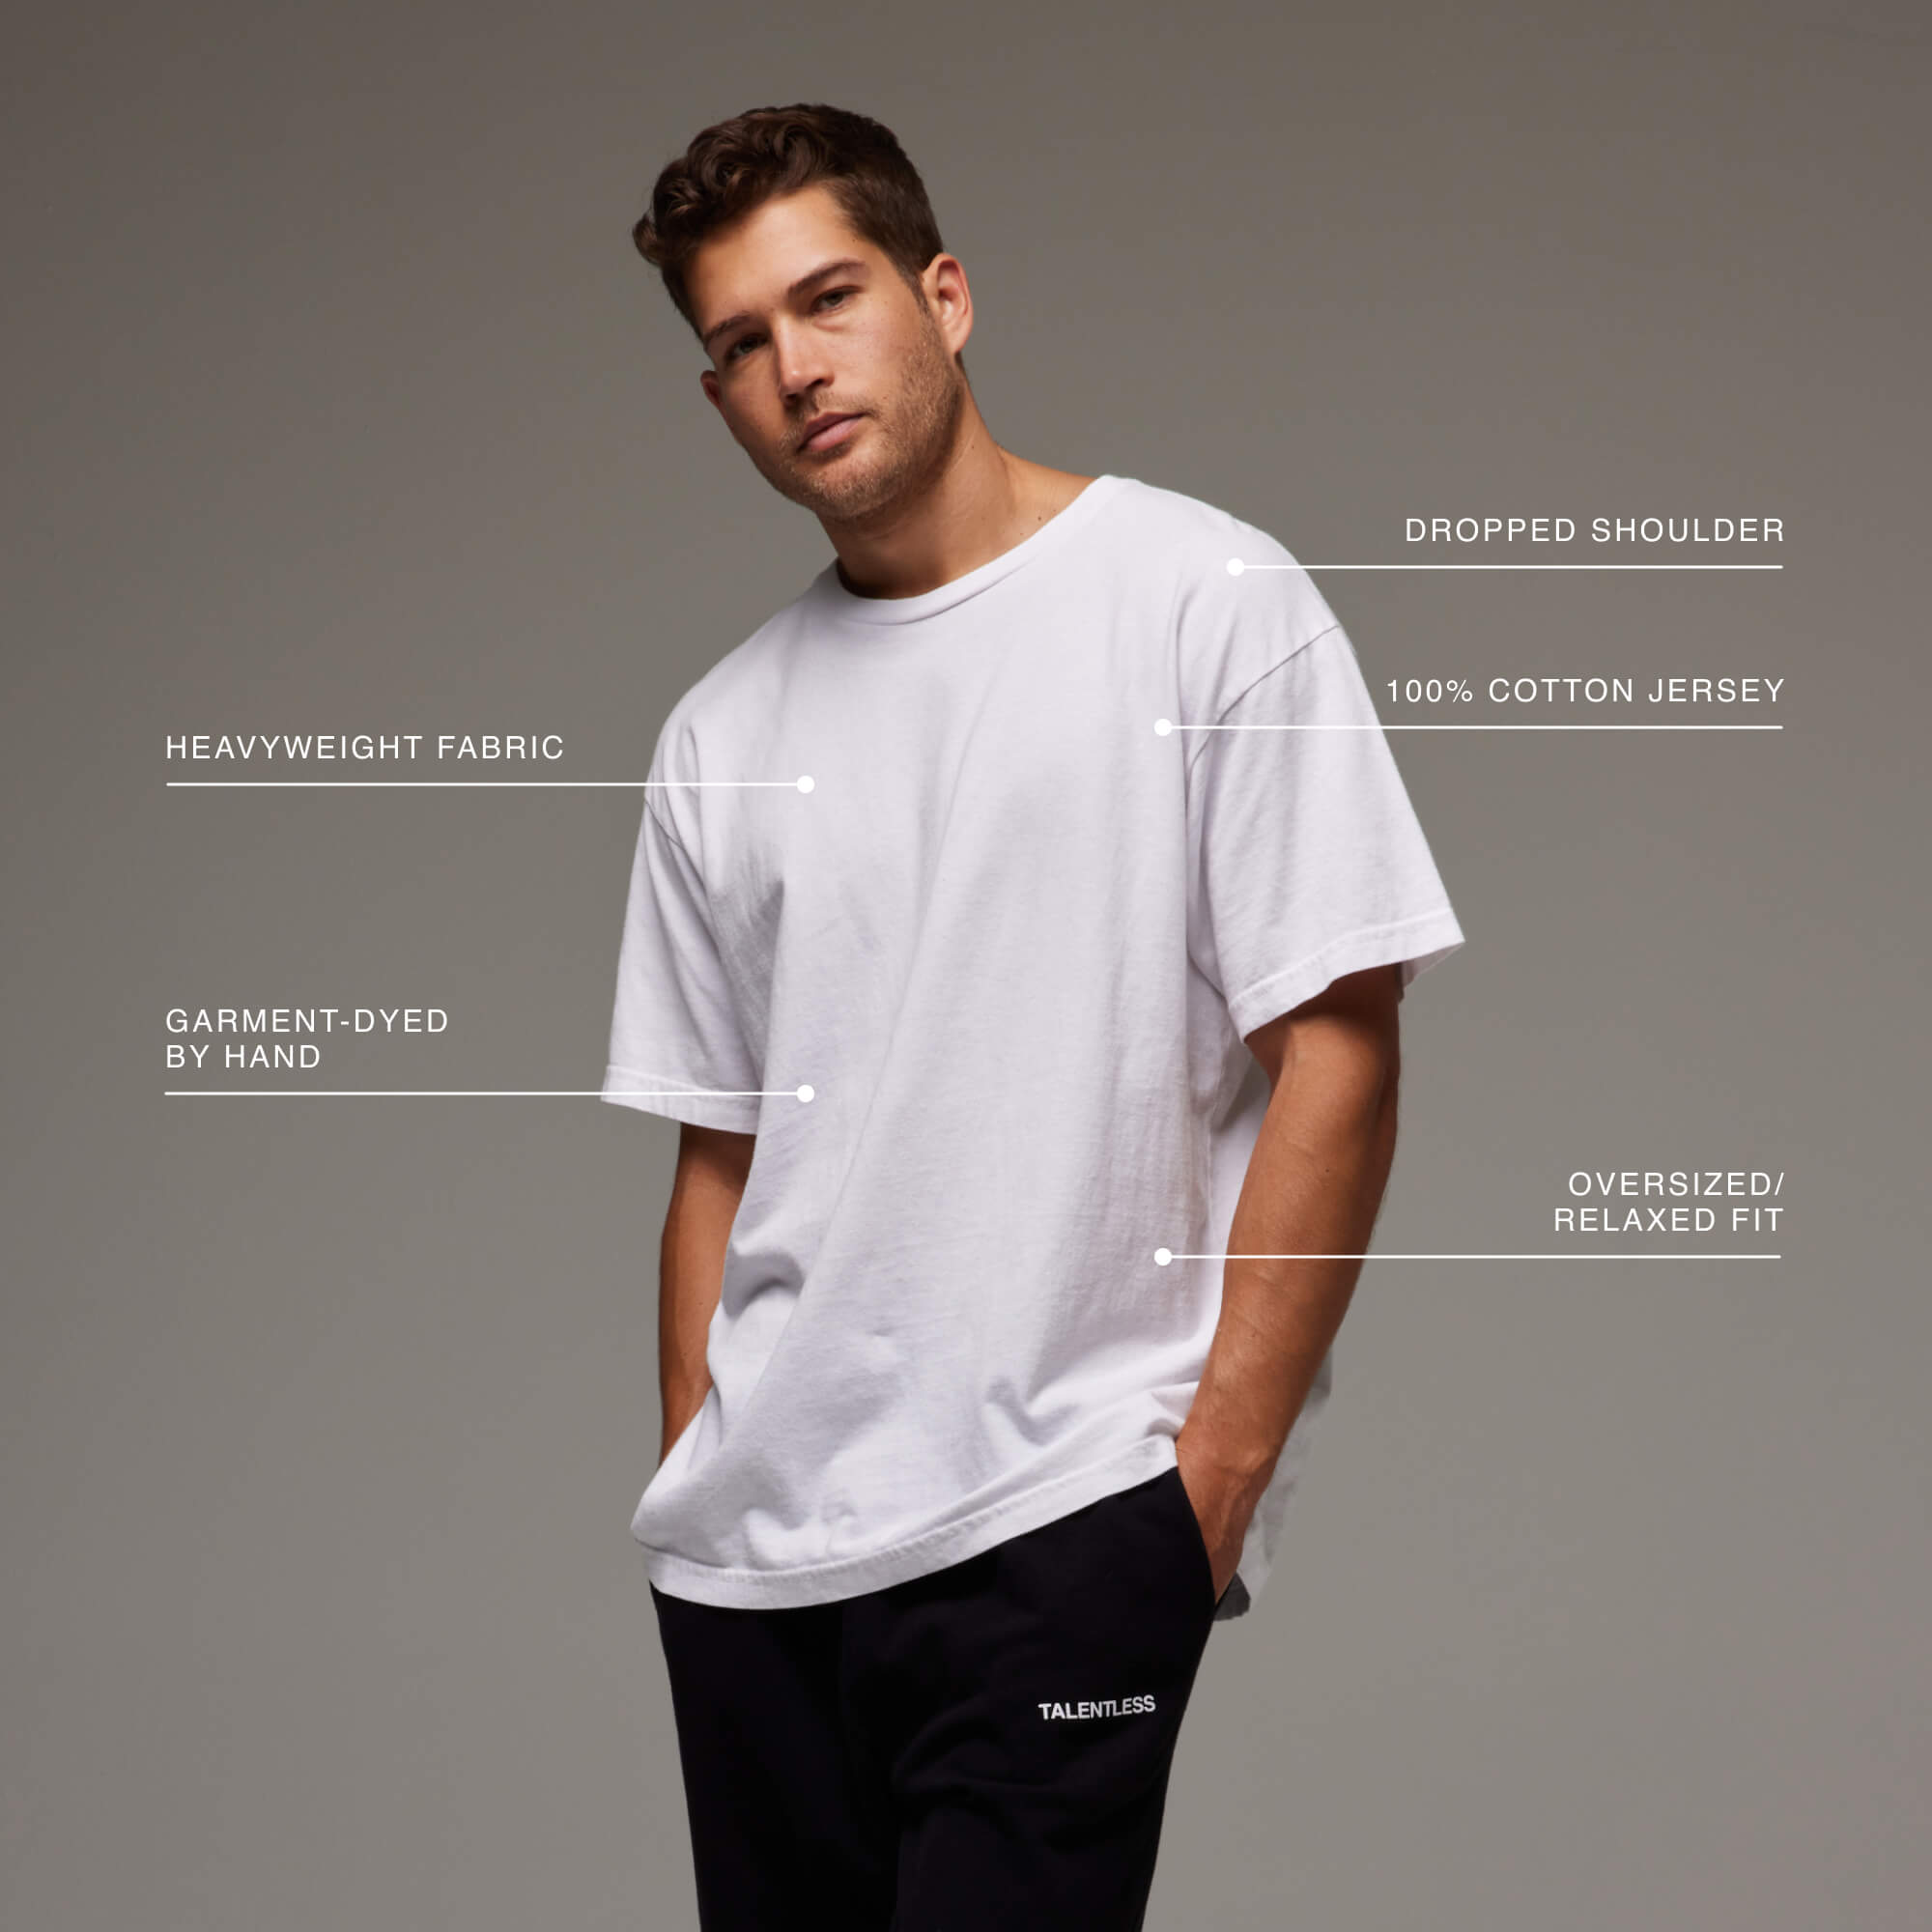 Model wearing the Drop Shoulder Tee with descriptive tags which demonstrate that it's 100% cotton, dropped shoulders and relaxed fit